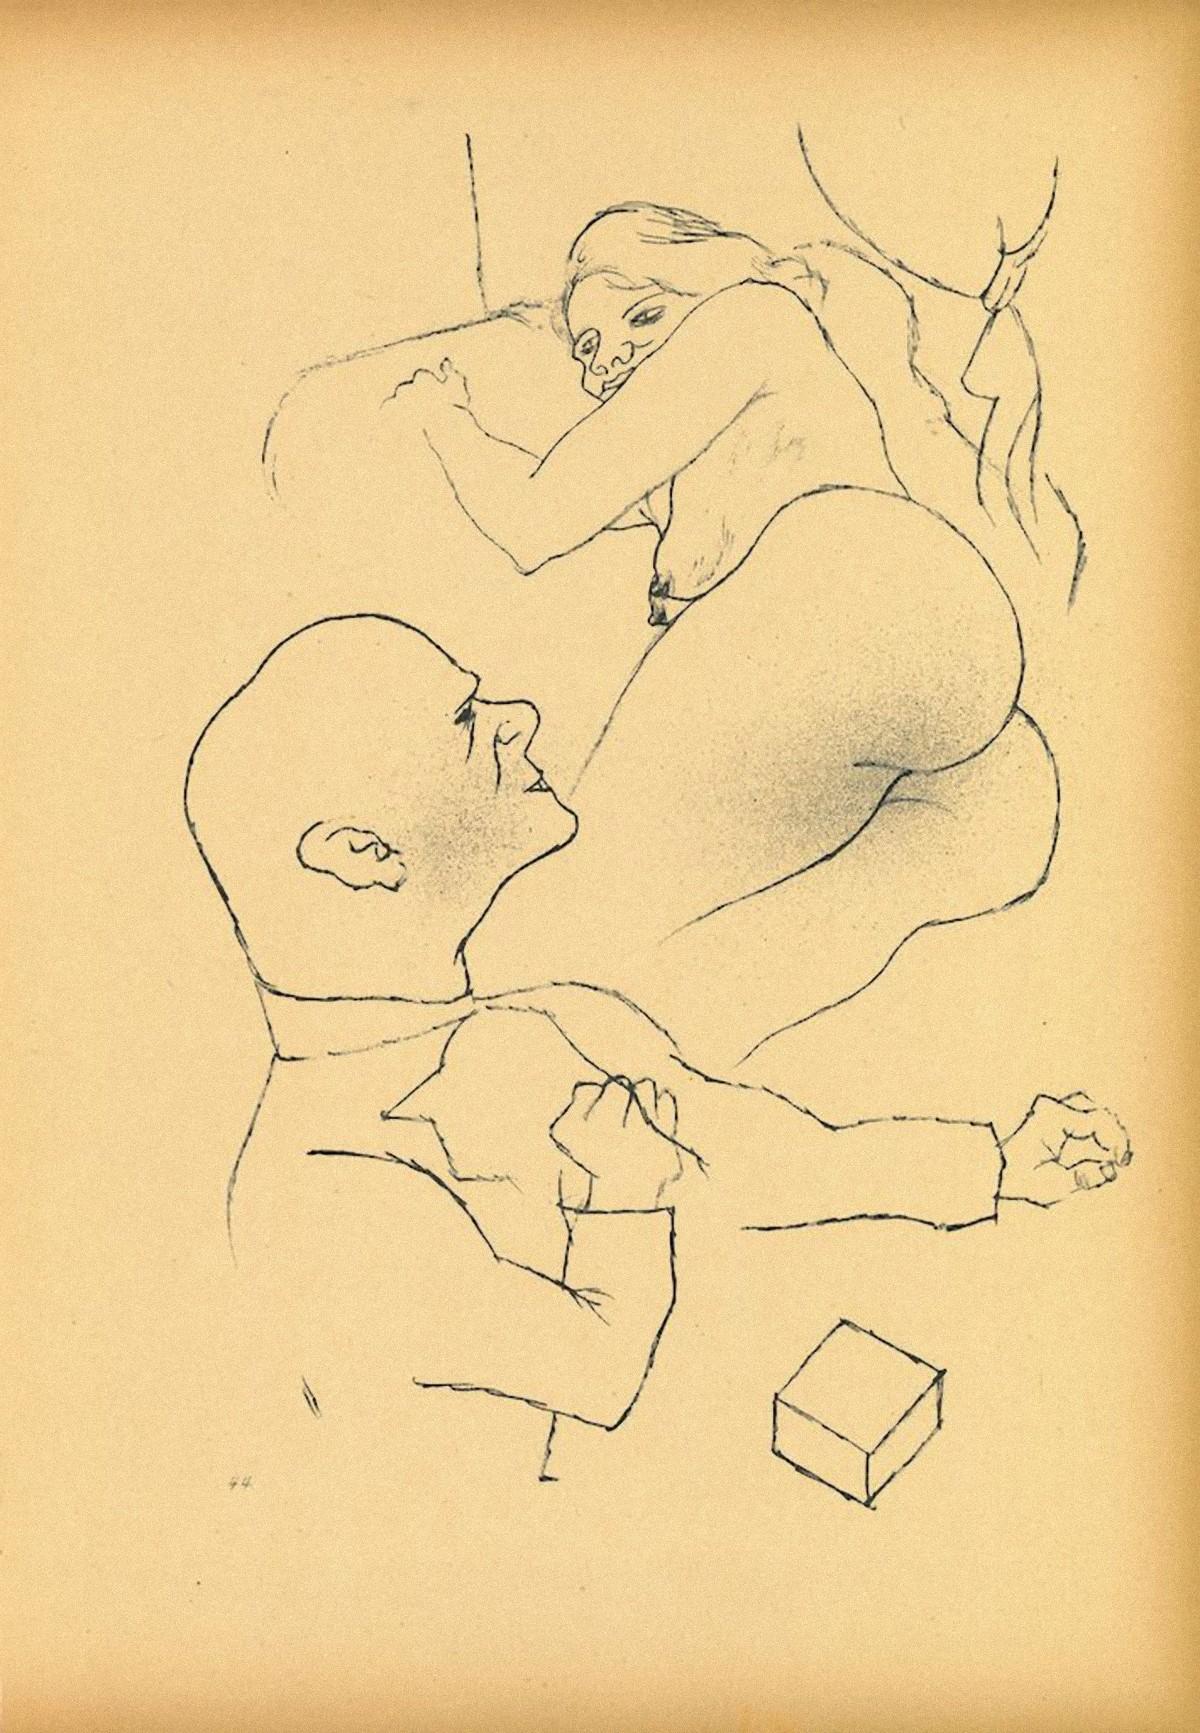 Dr.S. and Woman - Original Offset and Lithograph by George Grosz - 1923